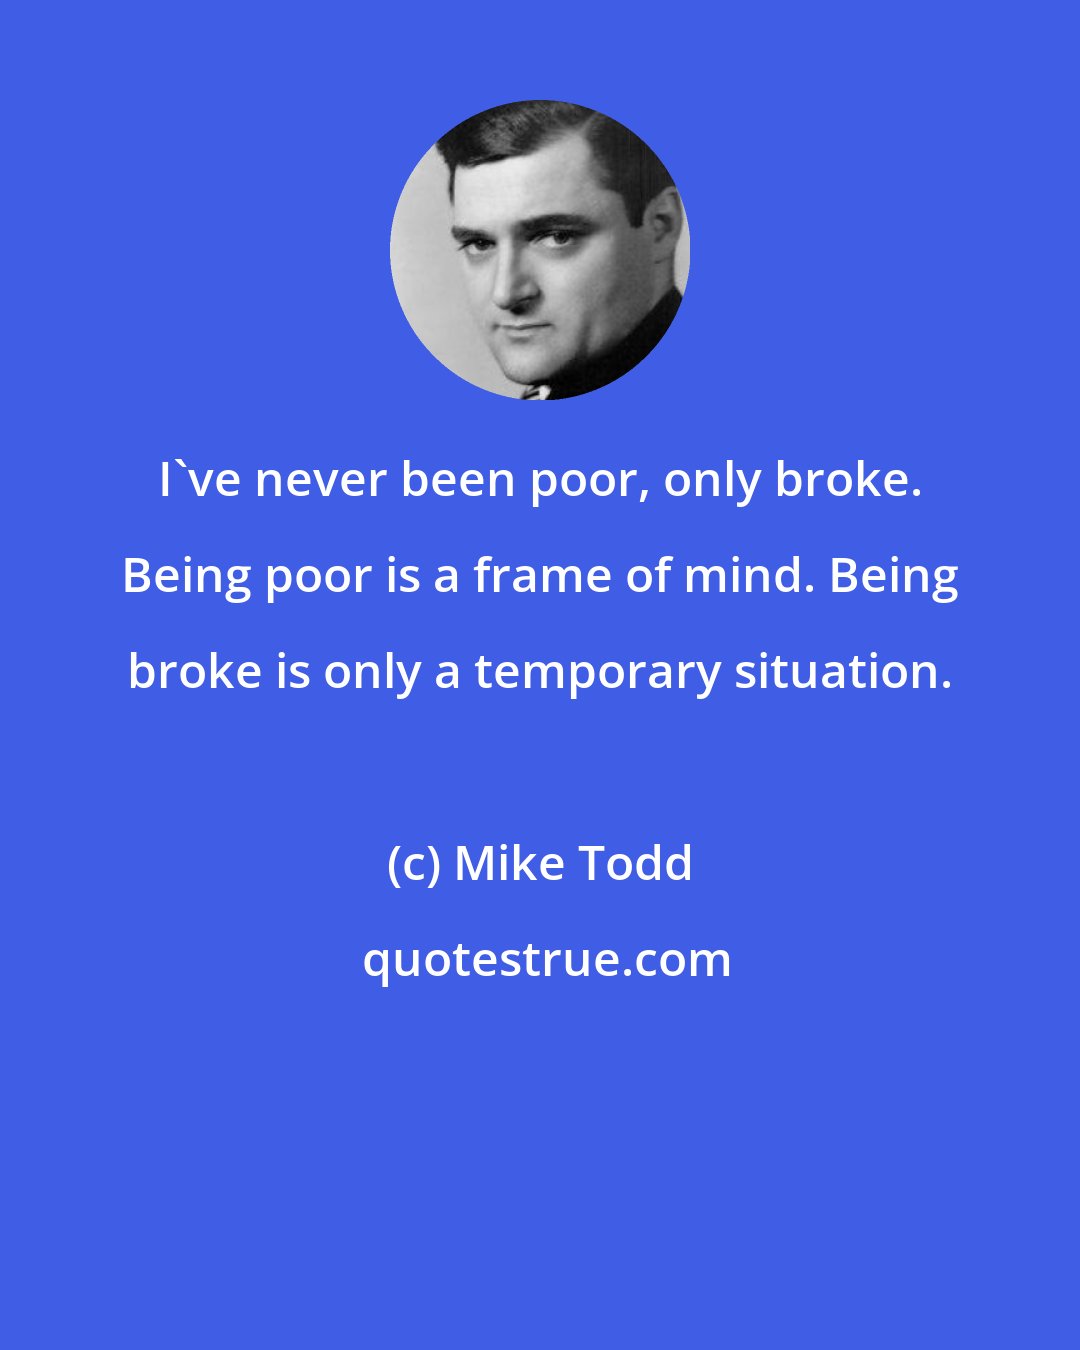 Mike Todd: I've never been poor, only broke. Being poor is a frame of mind. Being broke is only a temporary situation.